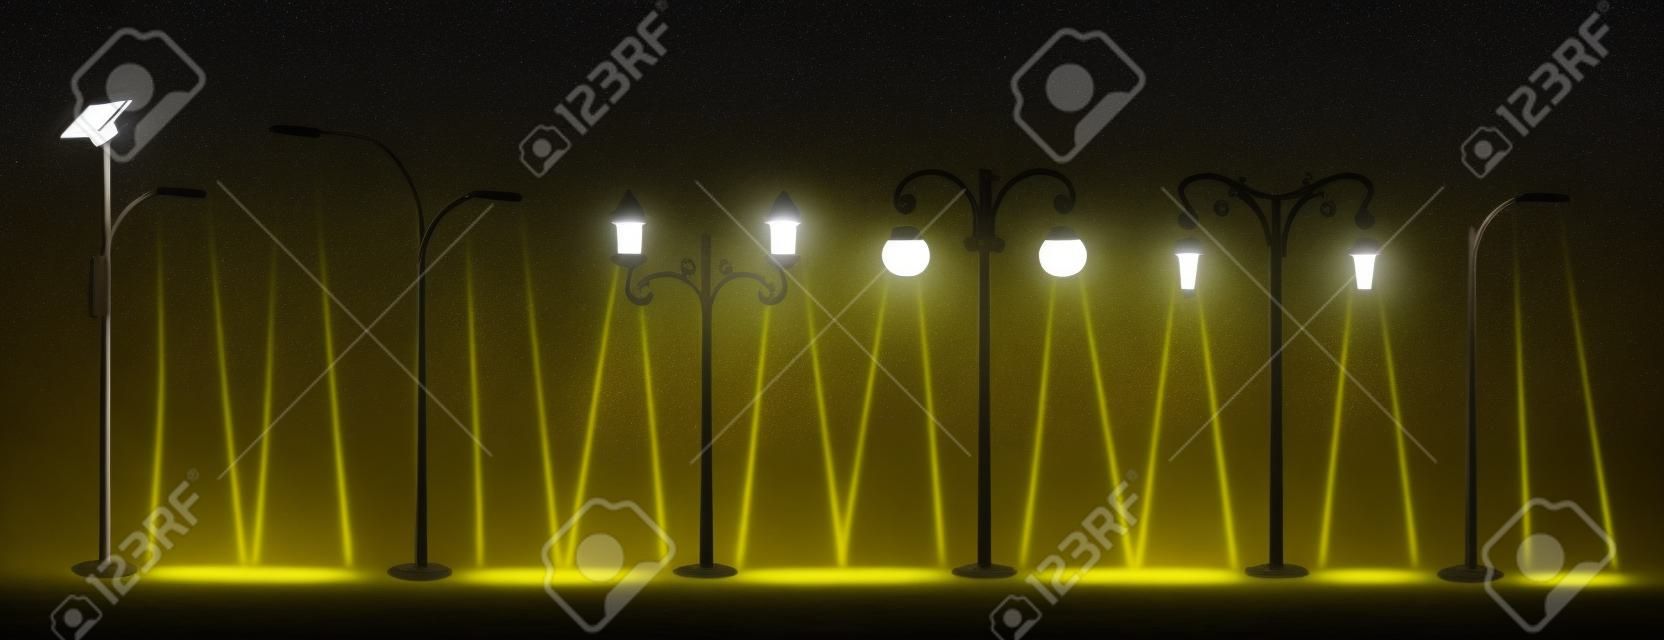 Various types of street light night lantern. street lights glowing in darkness yellow warm and cold white light.